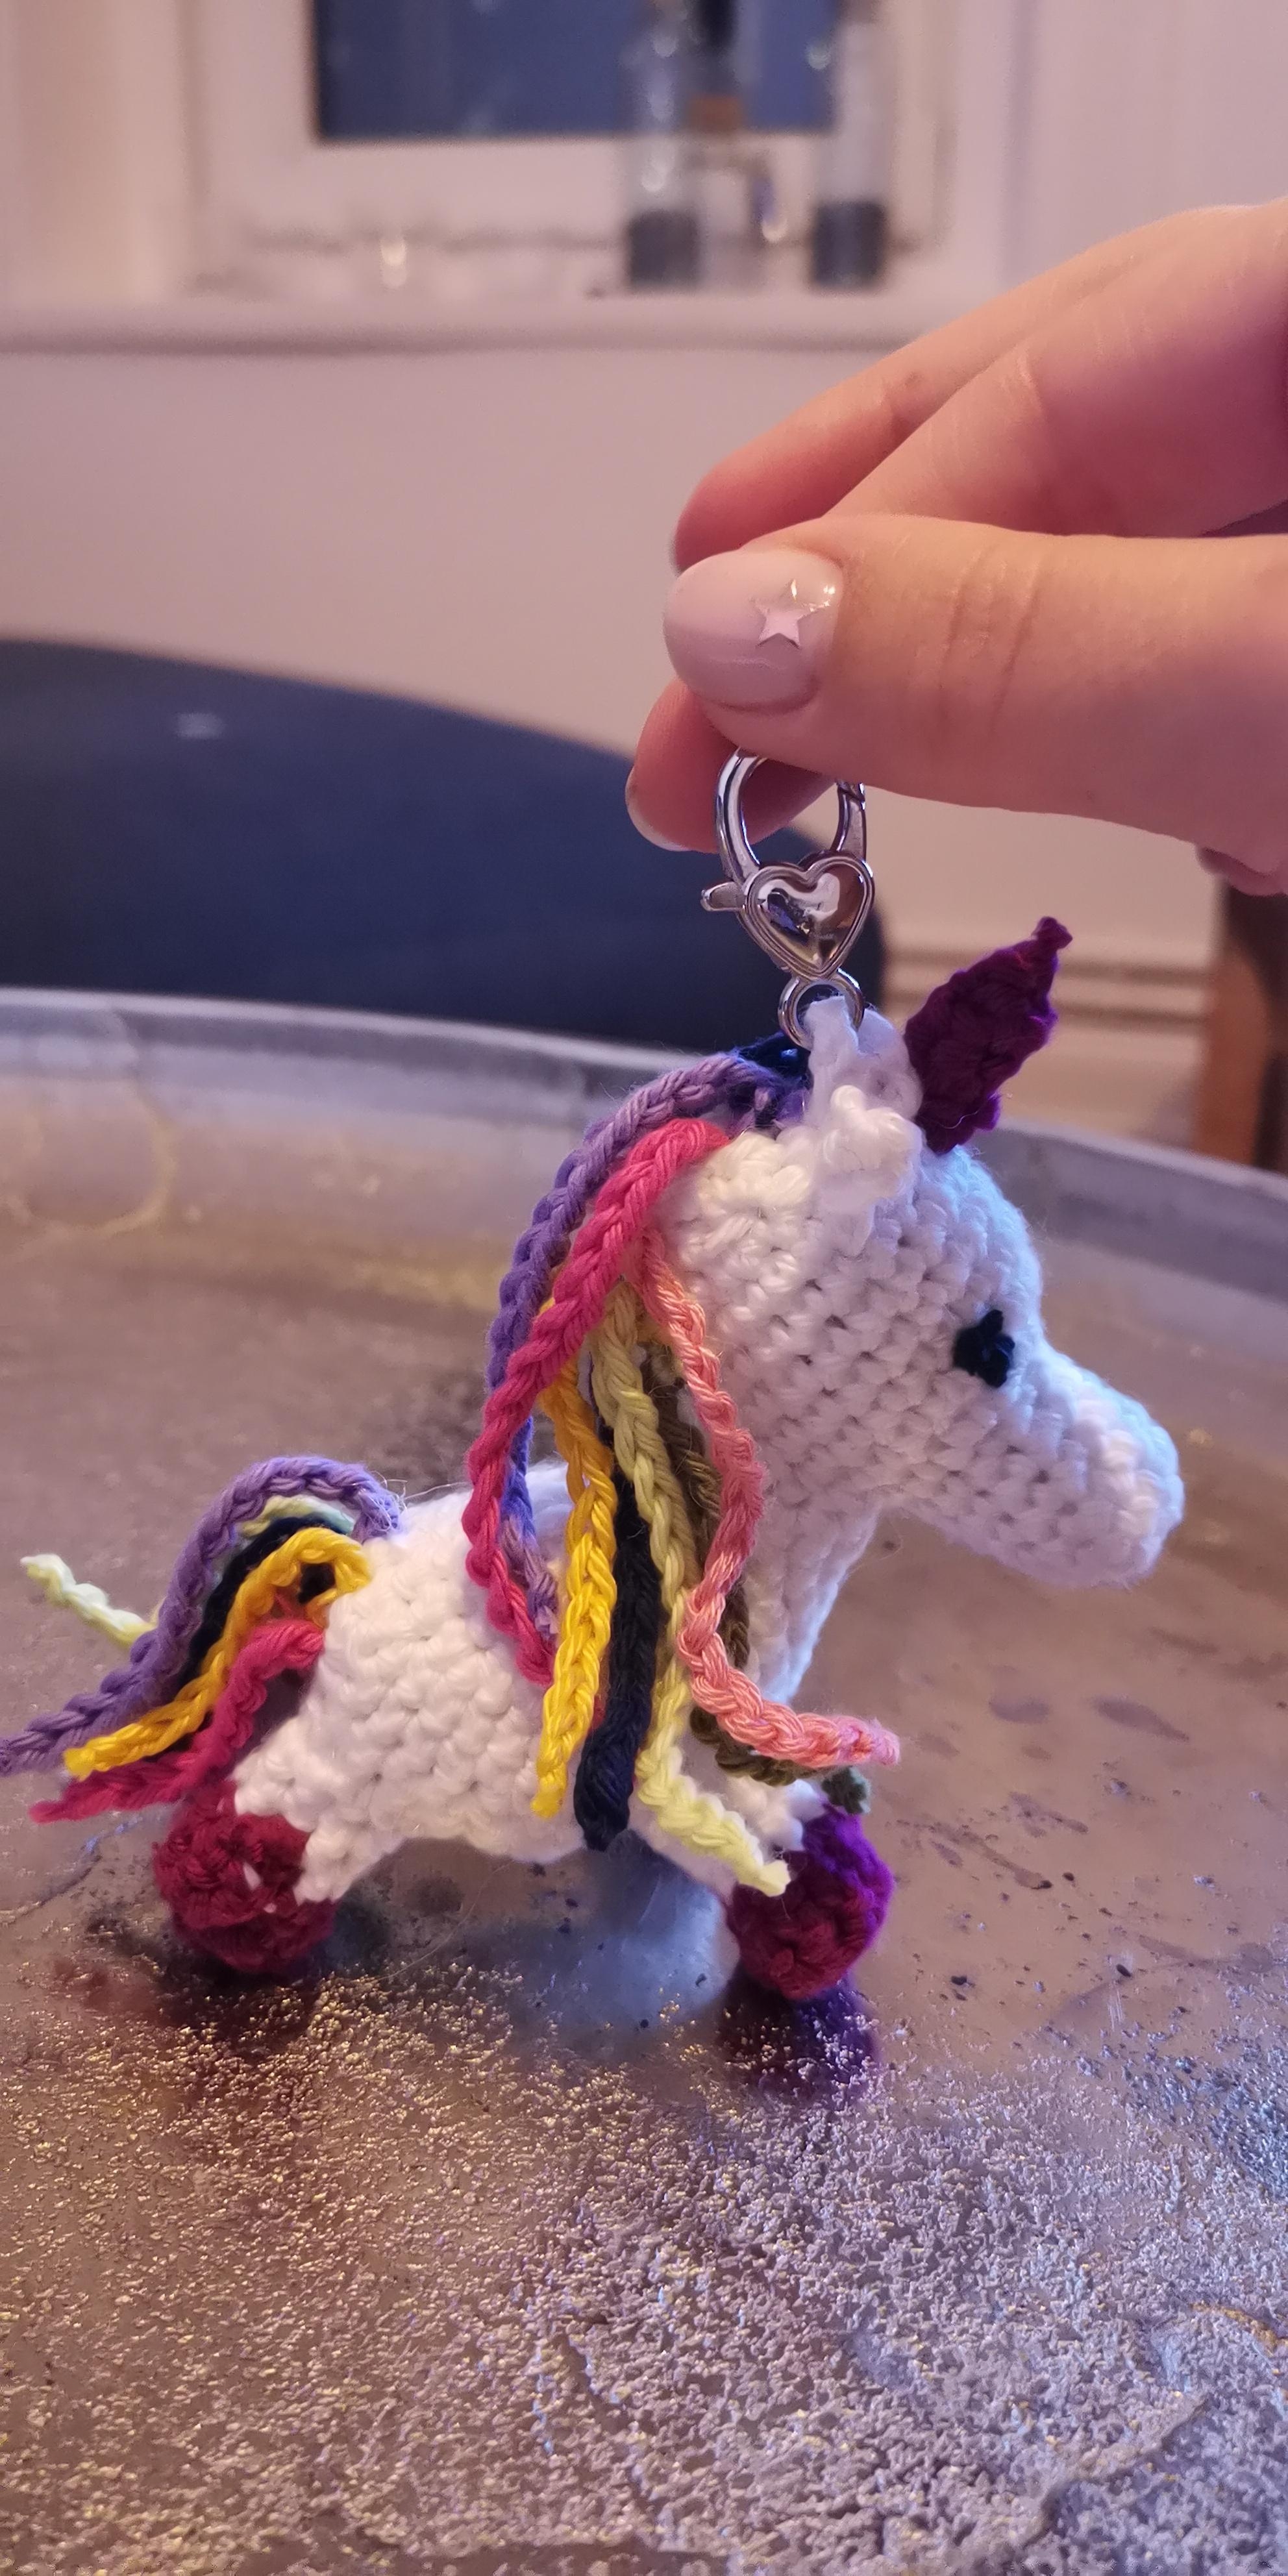 Thought I bring you little magic in this tough times.
#fuckcorona #unicorn #magic #newhobby